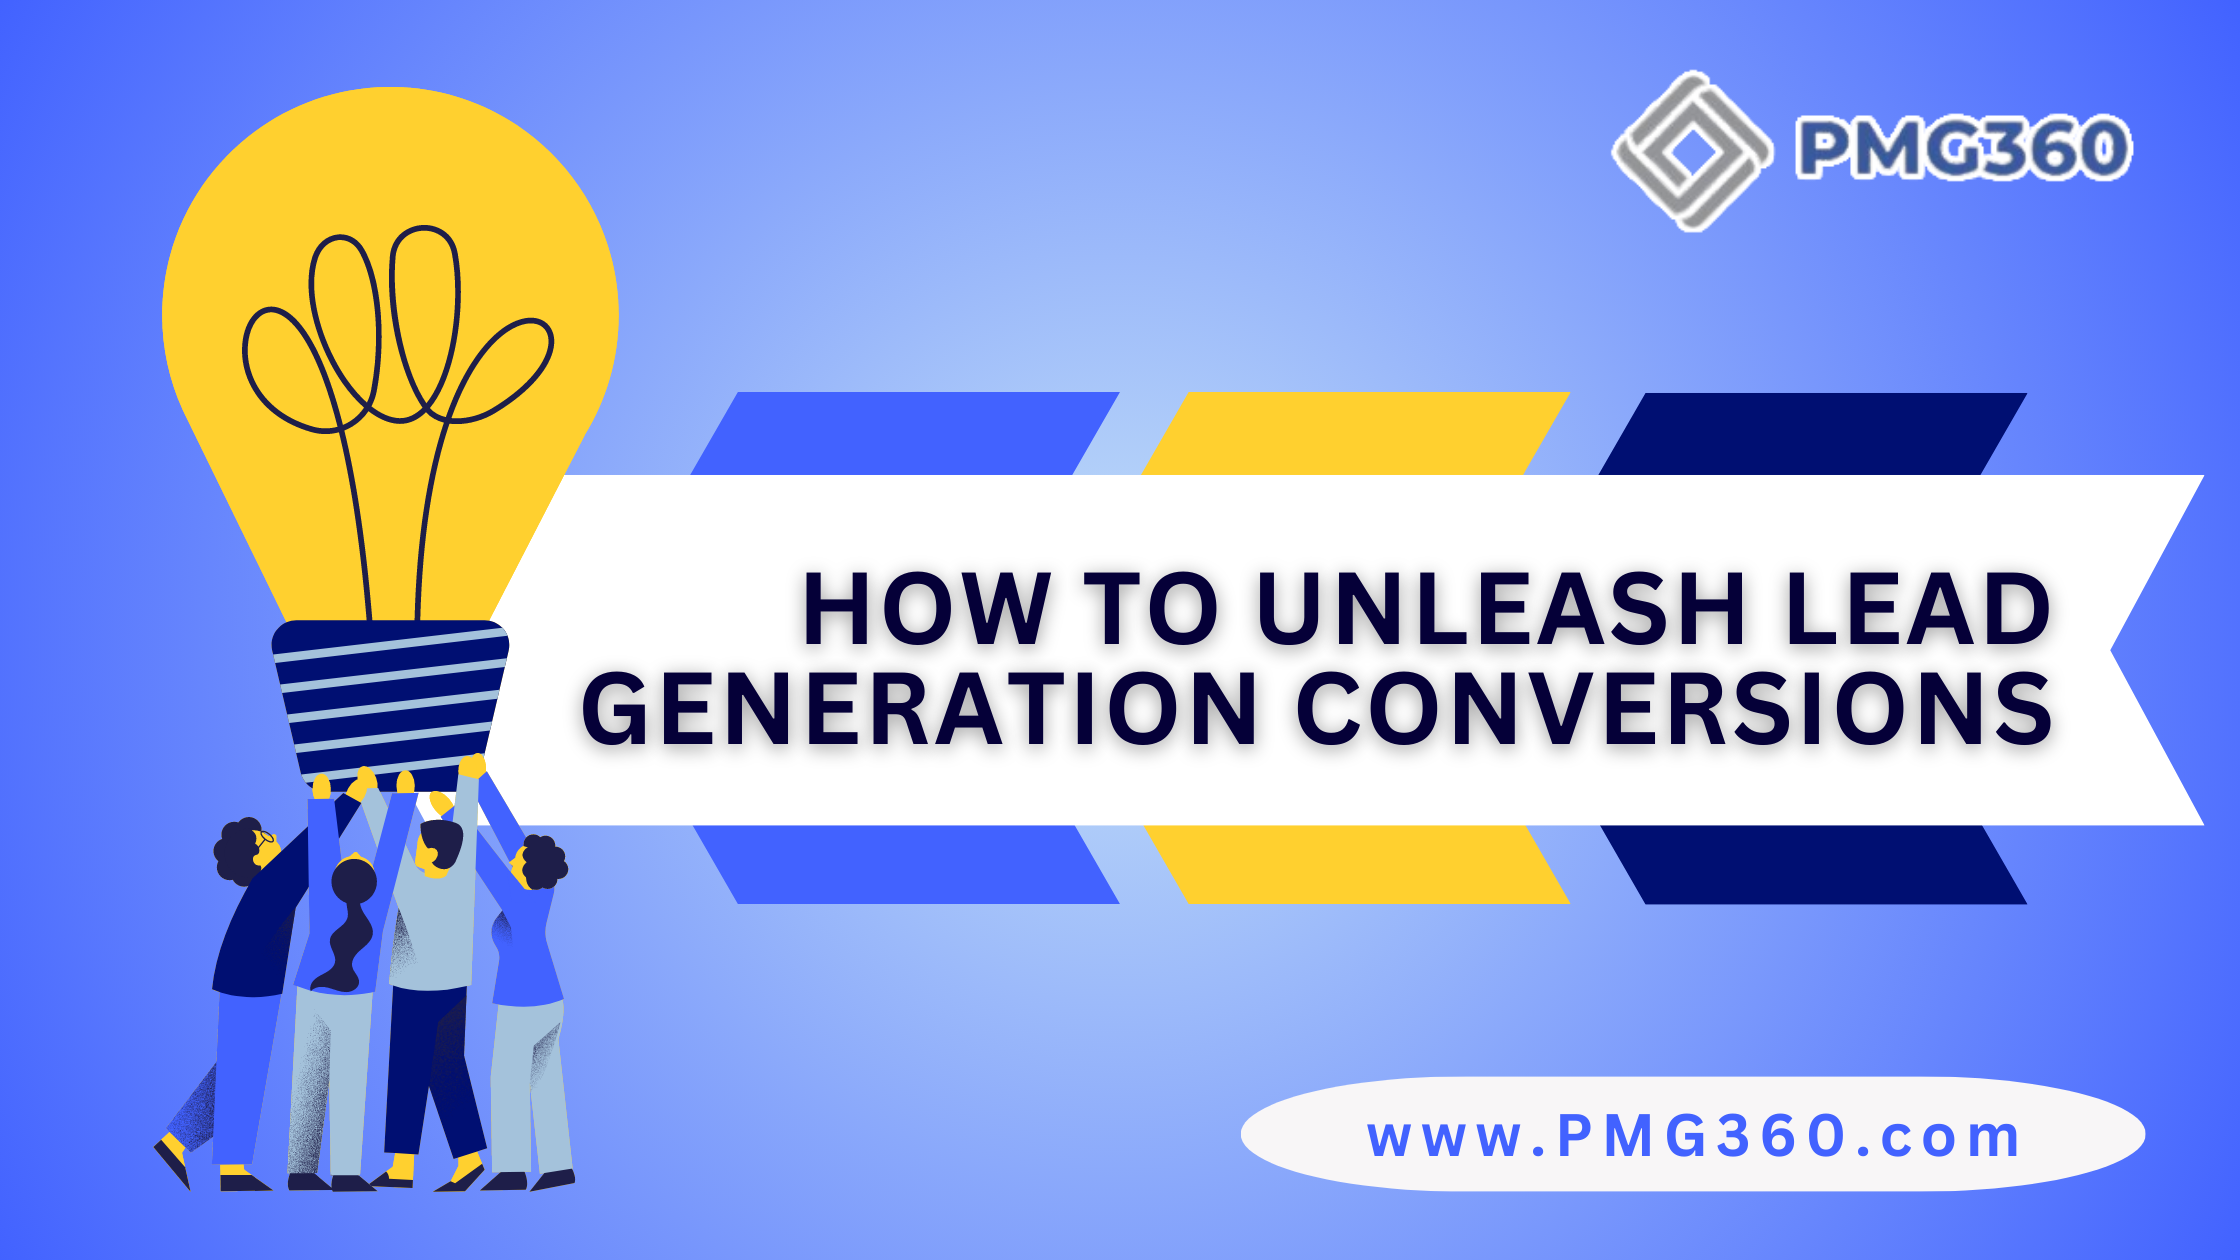 How to Unleash Lead Generation Conversions (1)